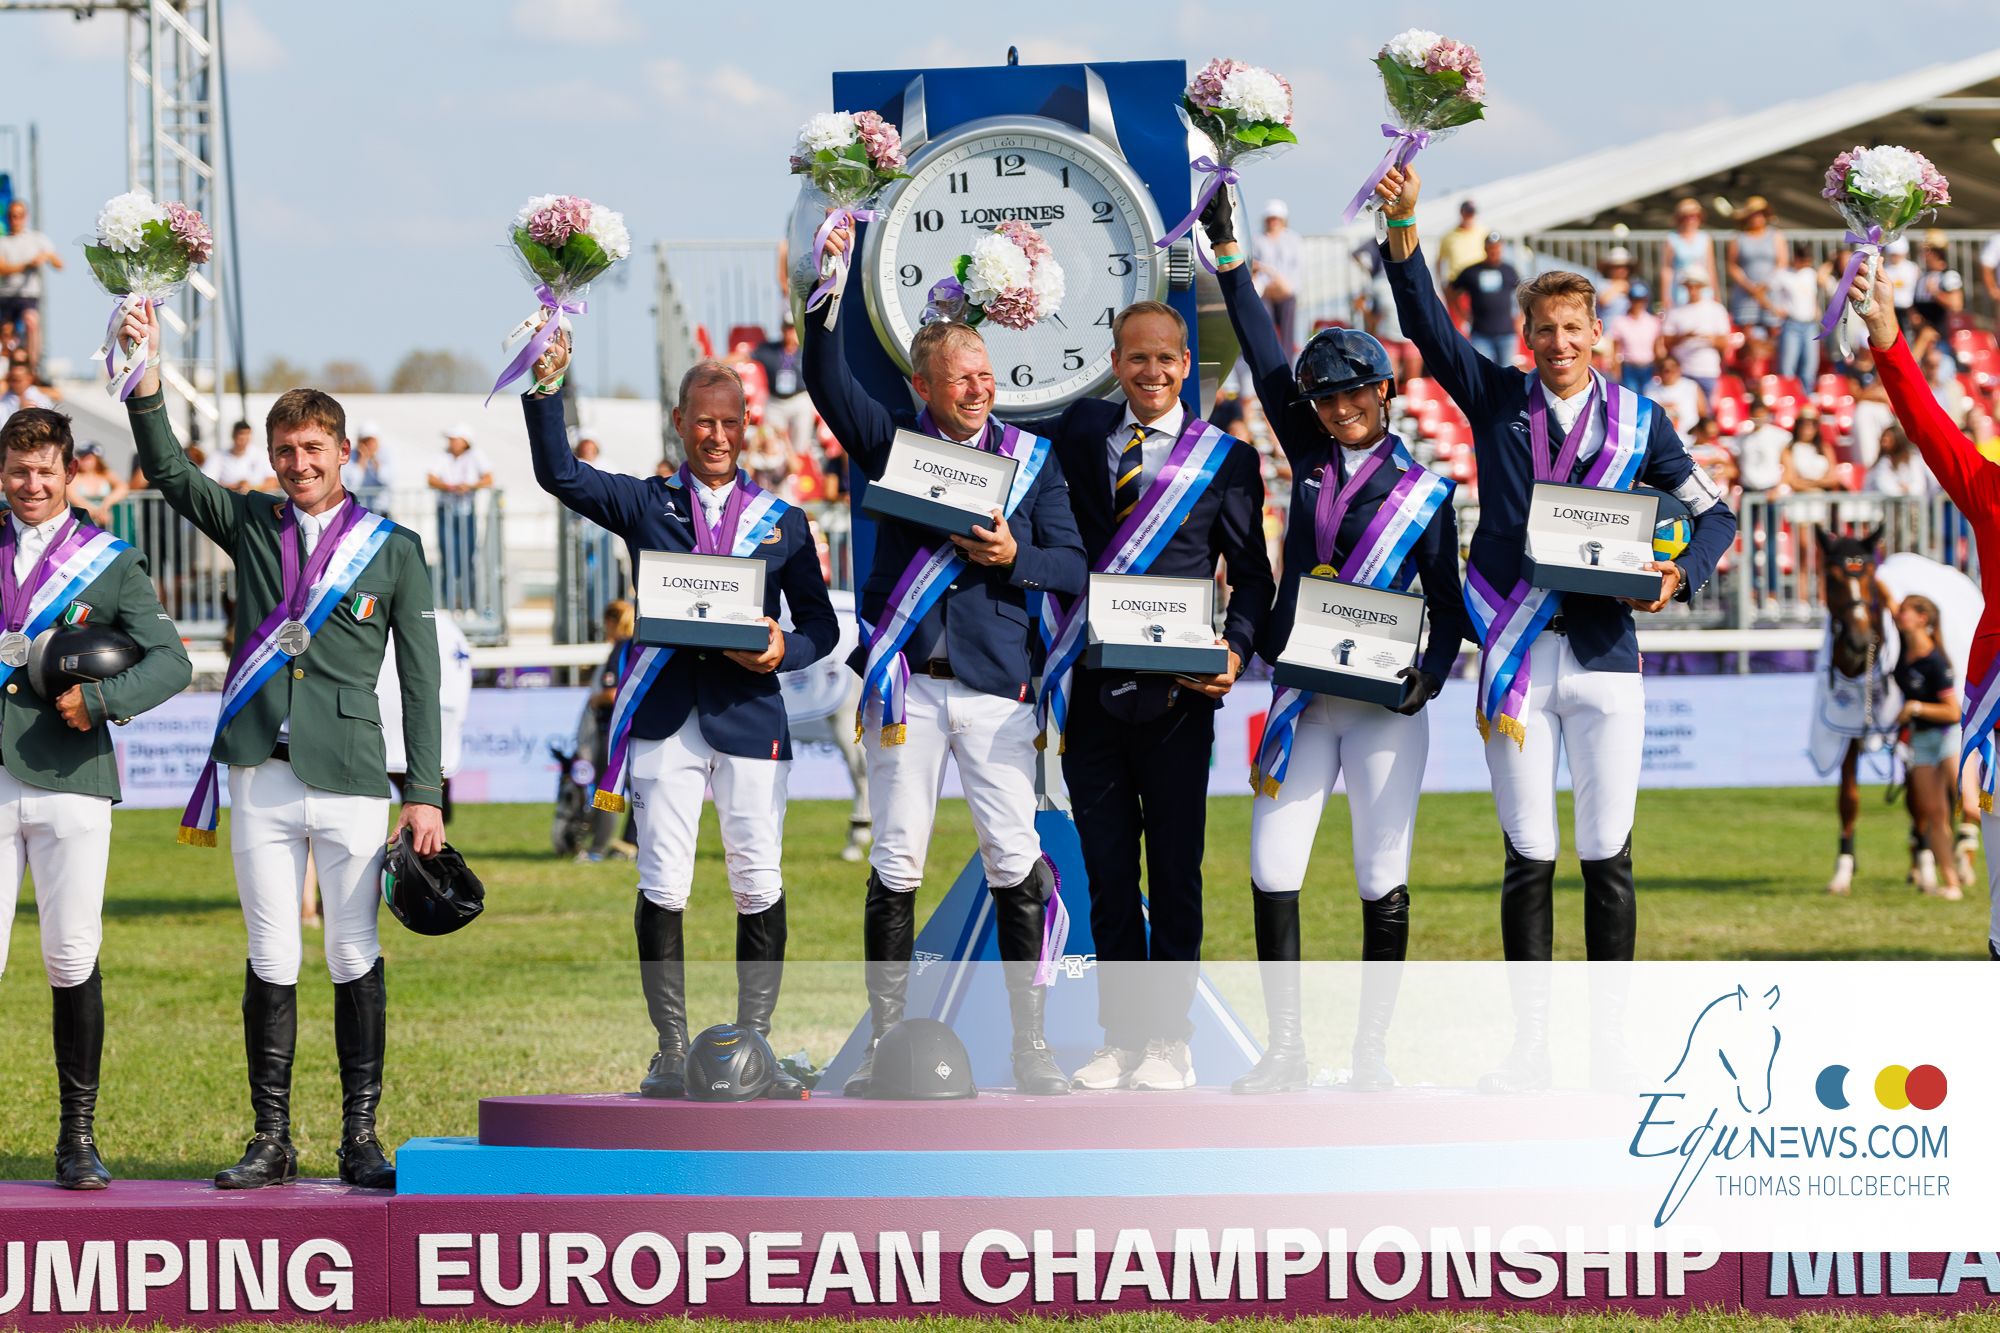 Sweden seals the deal in FEI Jumping European Championship of Milan: "No one can say this isn't exciting"